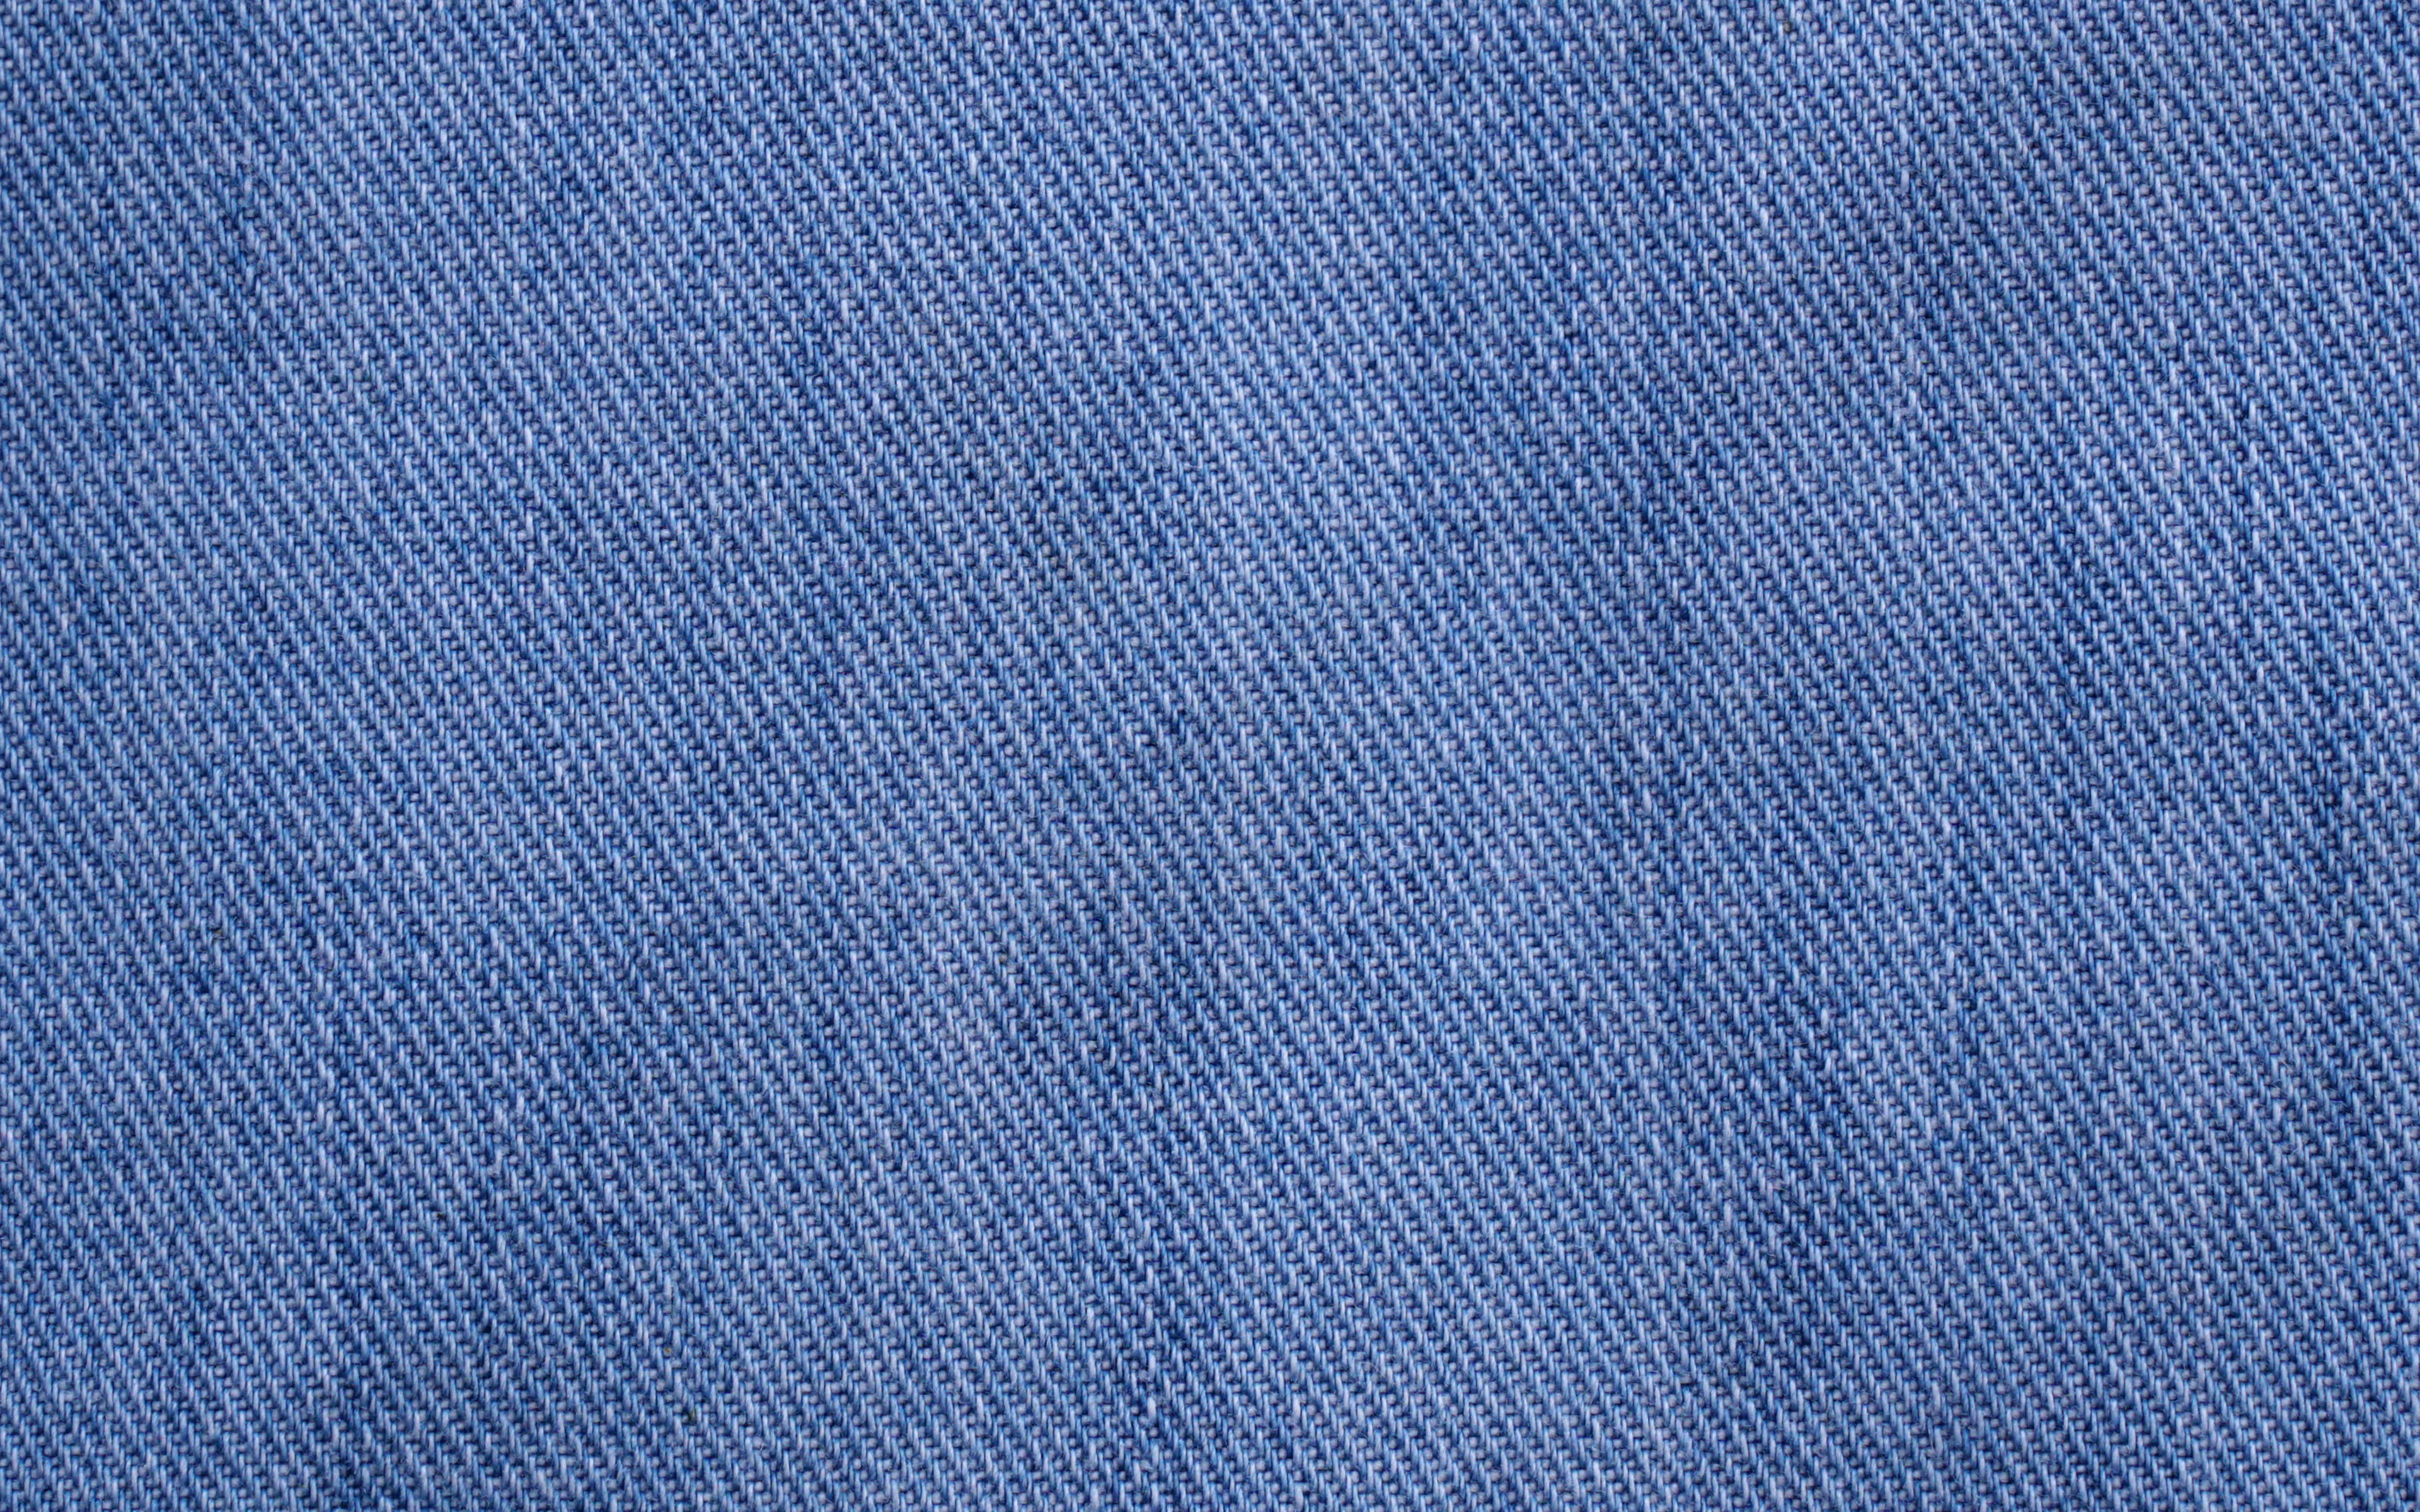 Download wallpaper blue denim texture, 4k, macro, blue denim background, jeans background, jeans textures, fabric background, blue jeans texture, jeans, blue fabric for desktop with resolution 3840x2400. High Quality HD picture wallpaper